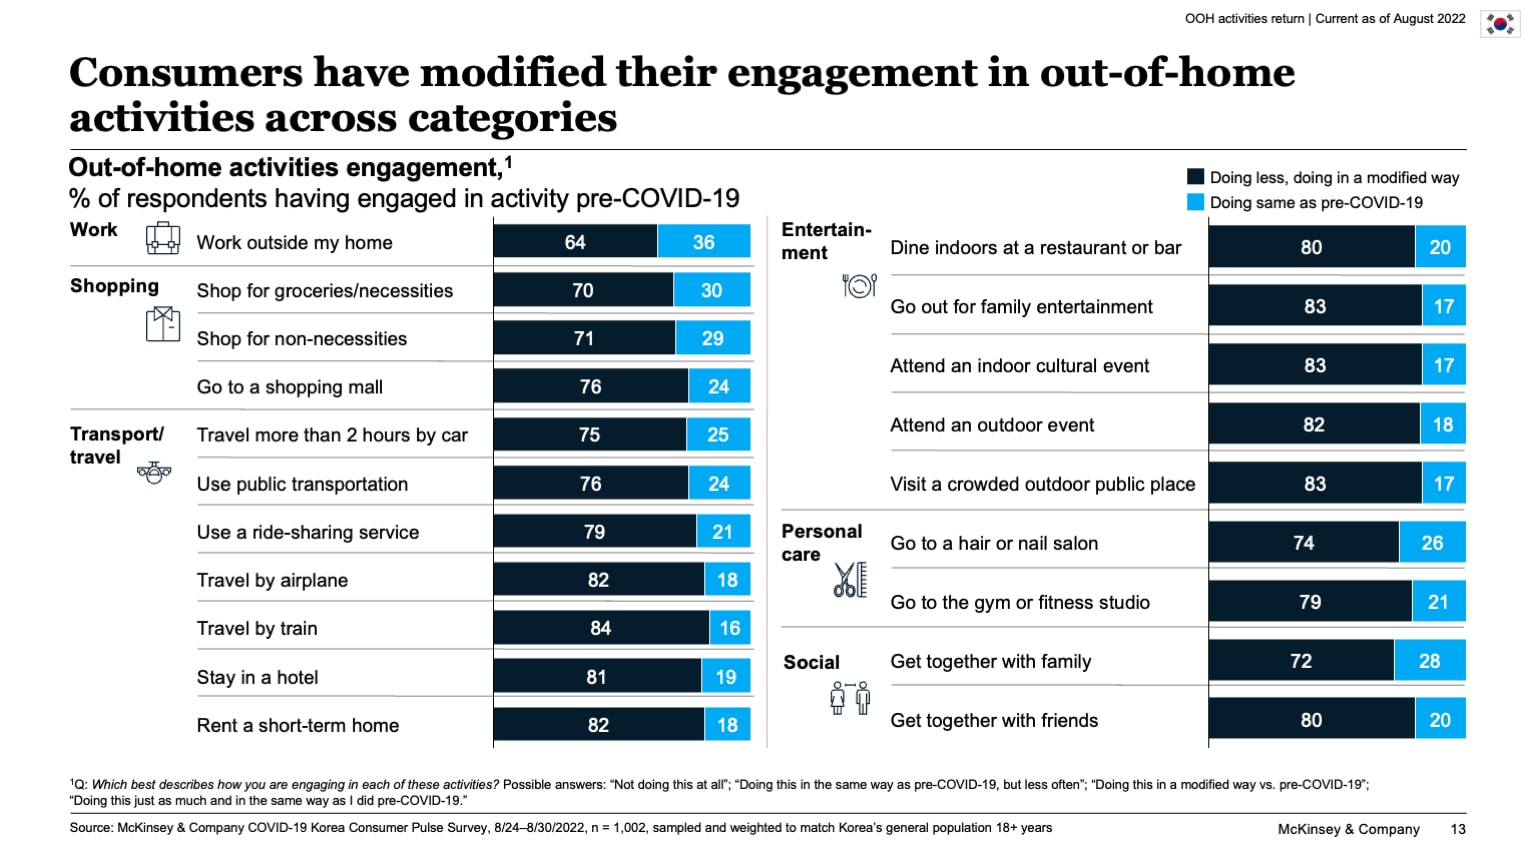 Consumers have modified their engagement in out-of-home activities across categories